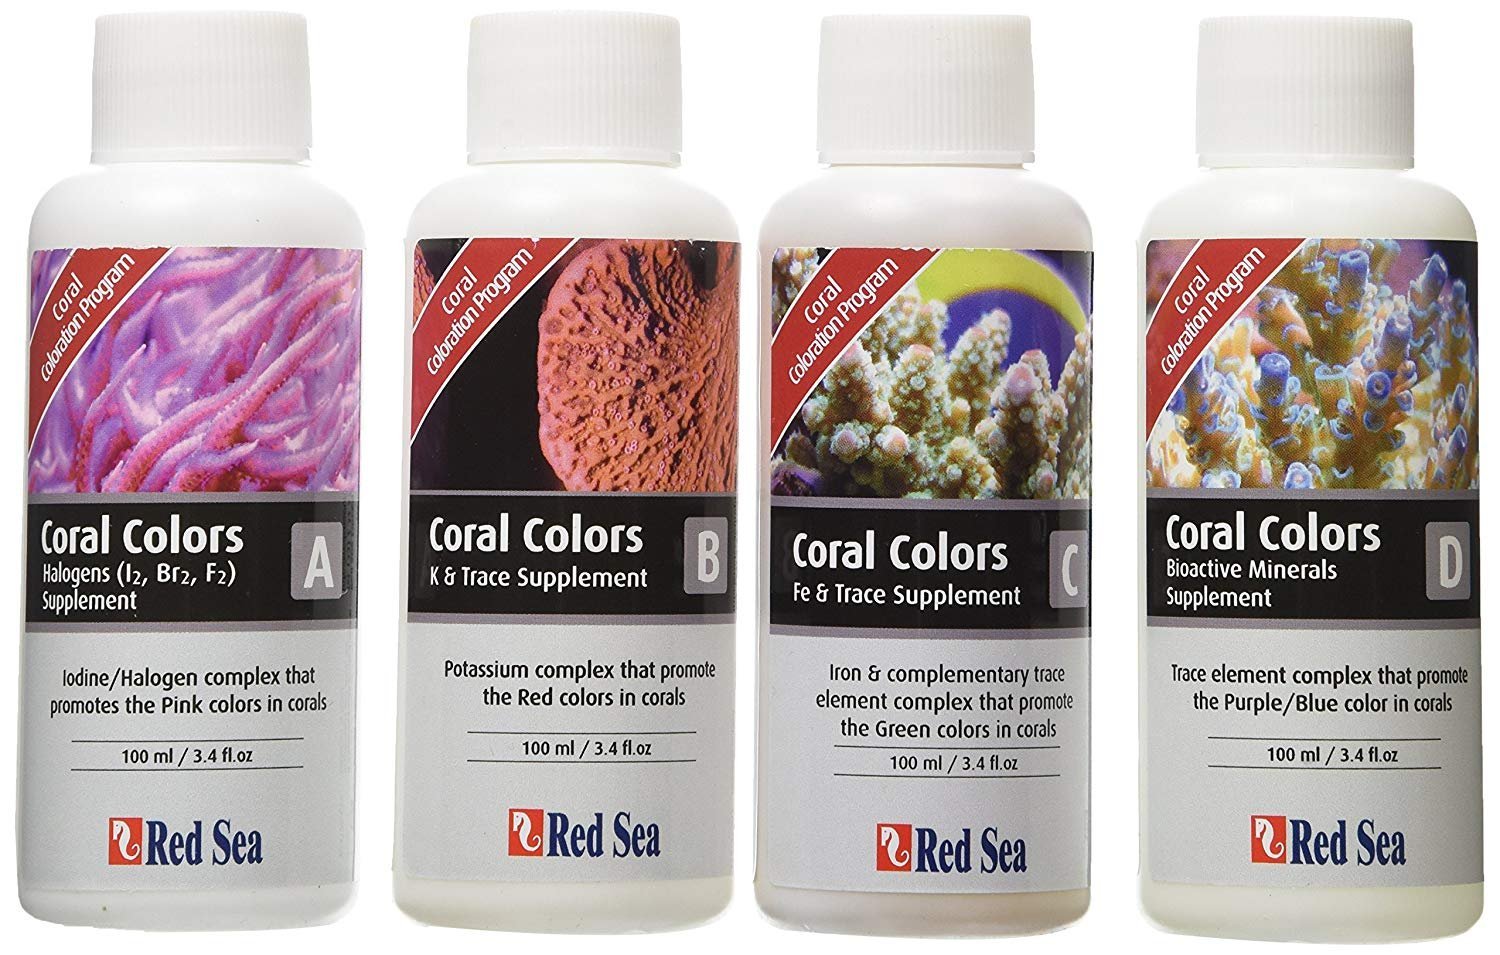 Red Sea Coral Colors ABCD 4 Supplement Pack - Kwik Pets